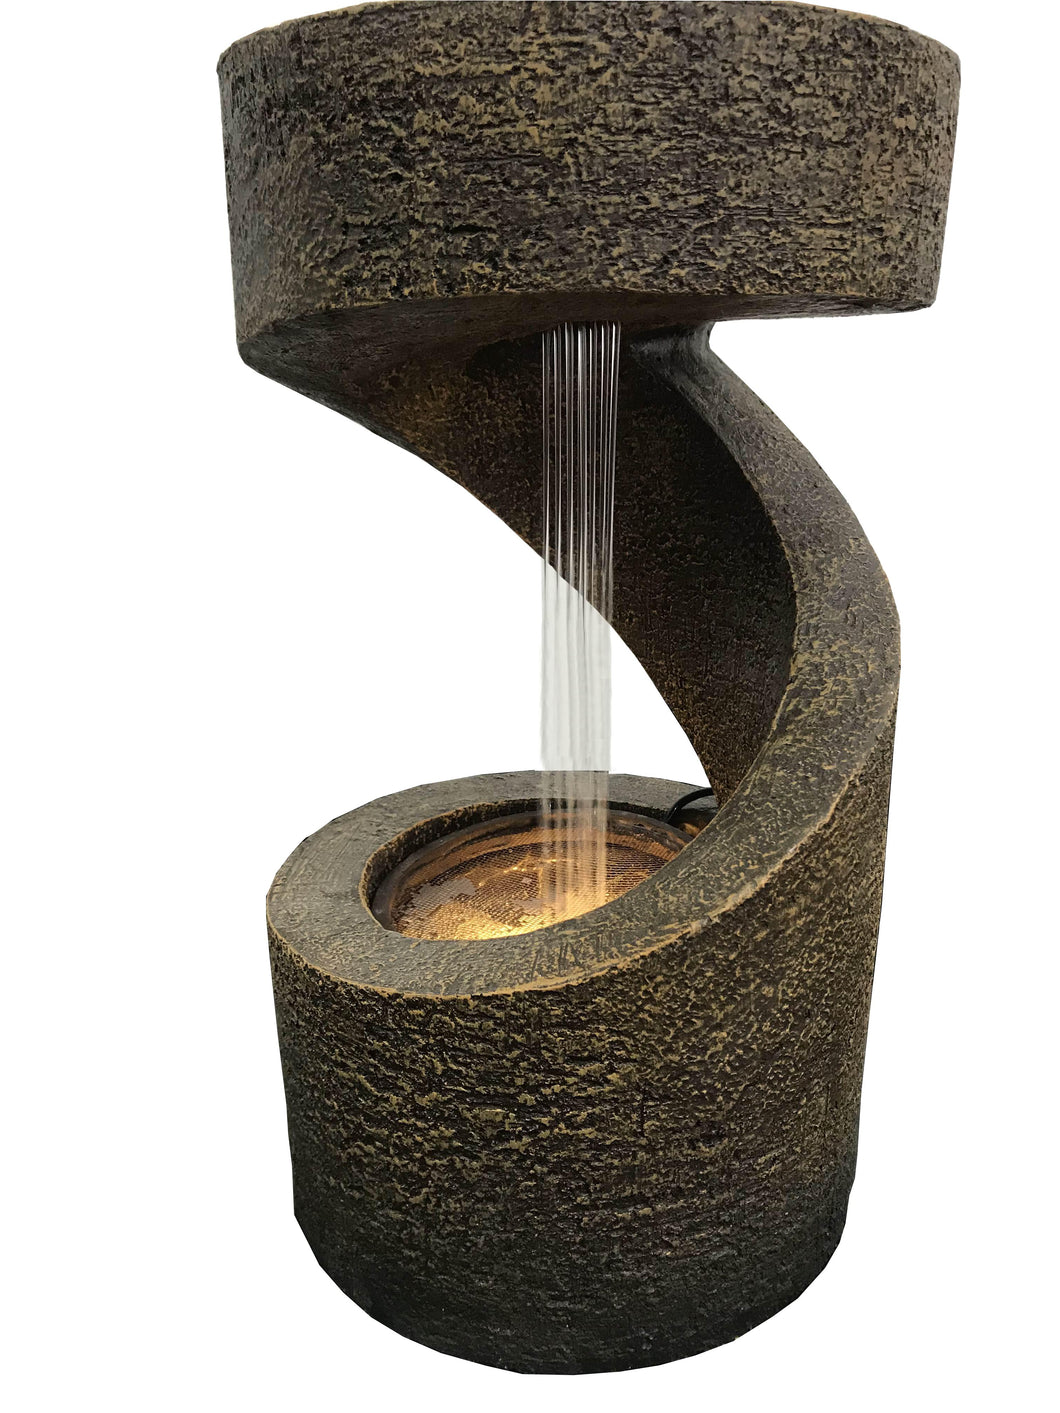 FOUNTAIN-14IN WOODEN FOUNTAIN W/ 1 LED